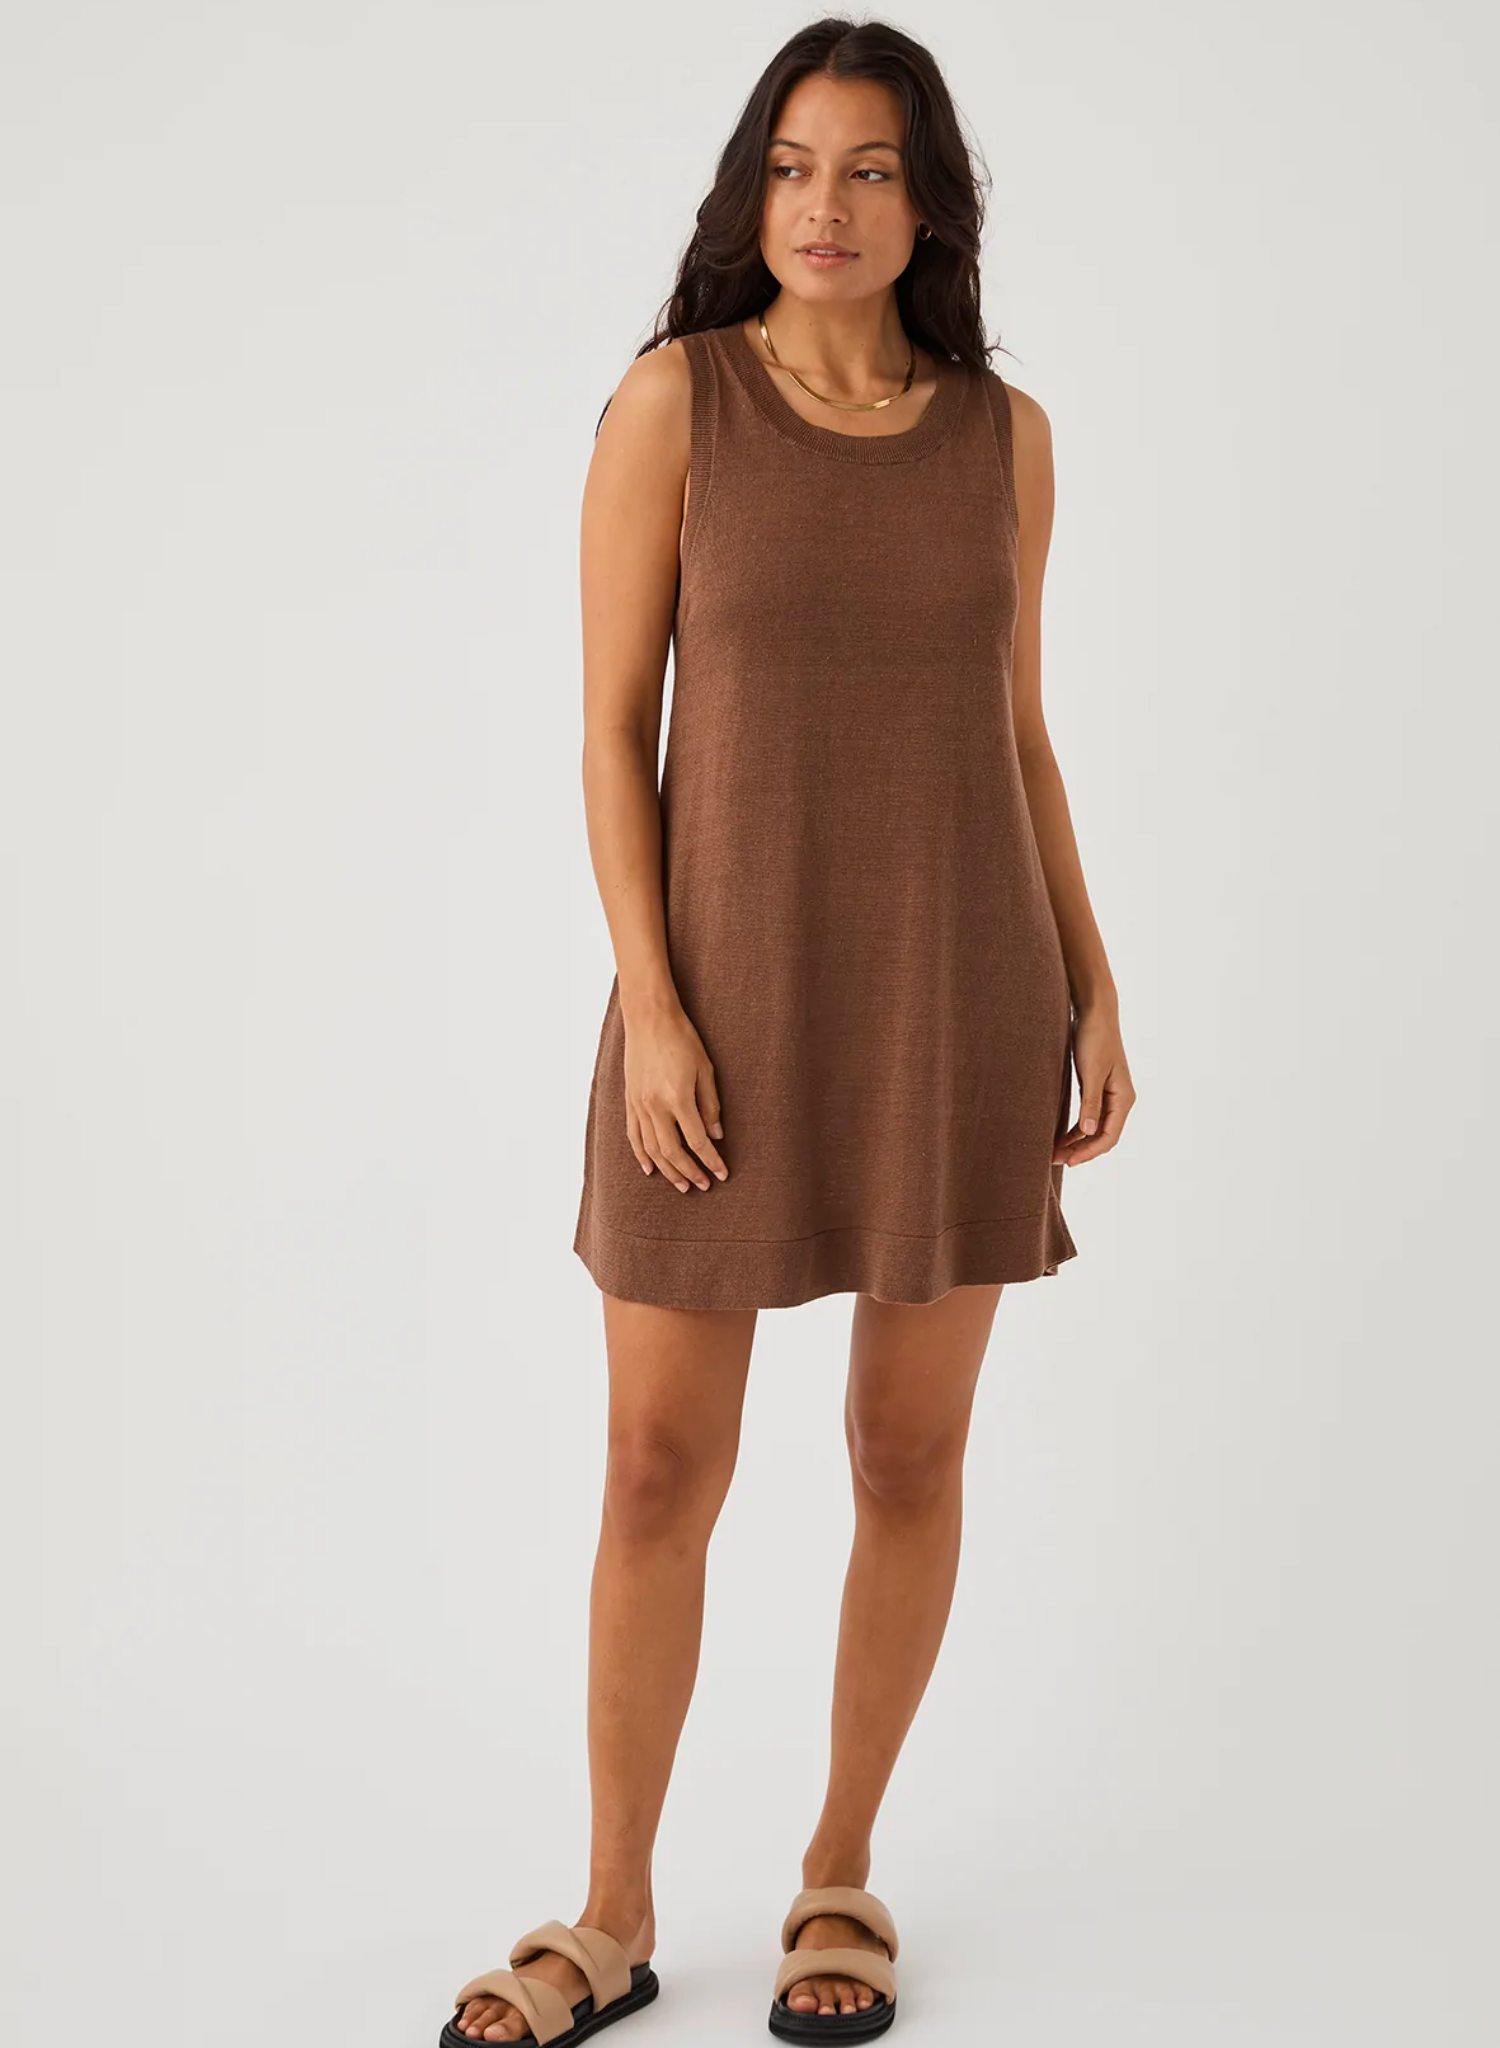 Brie Shift Dress in Chocolate. 100% Linen Knit Shift shape Wide crew neck Mini dress style Zero waste knit construction Soft hand feel Ethically produced Free of harmful chemicals : OEKO-TEX Standard 100 This piece is of 100% natural linen, carefully knitted with zero waste. With this is mind, this item appreciates good care so it can be enjoyed for seasons to come.